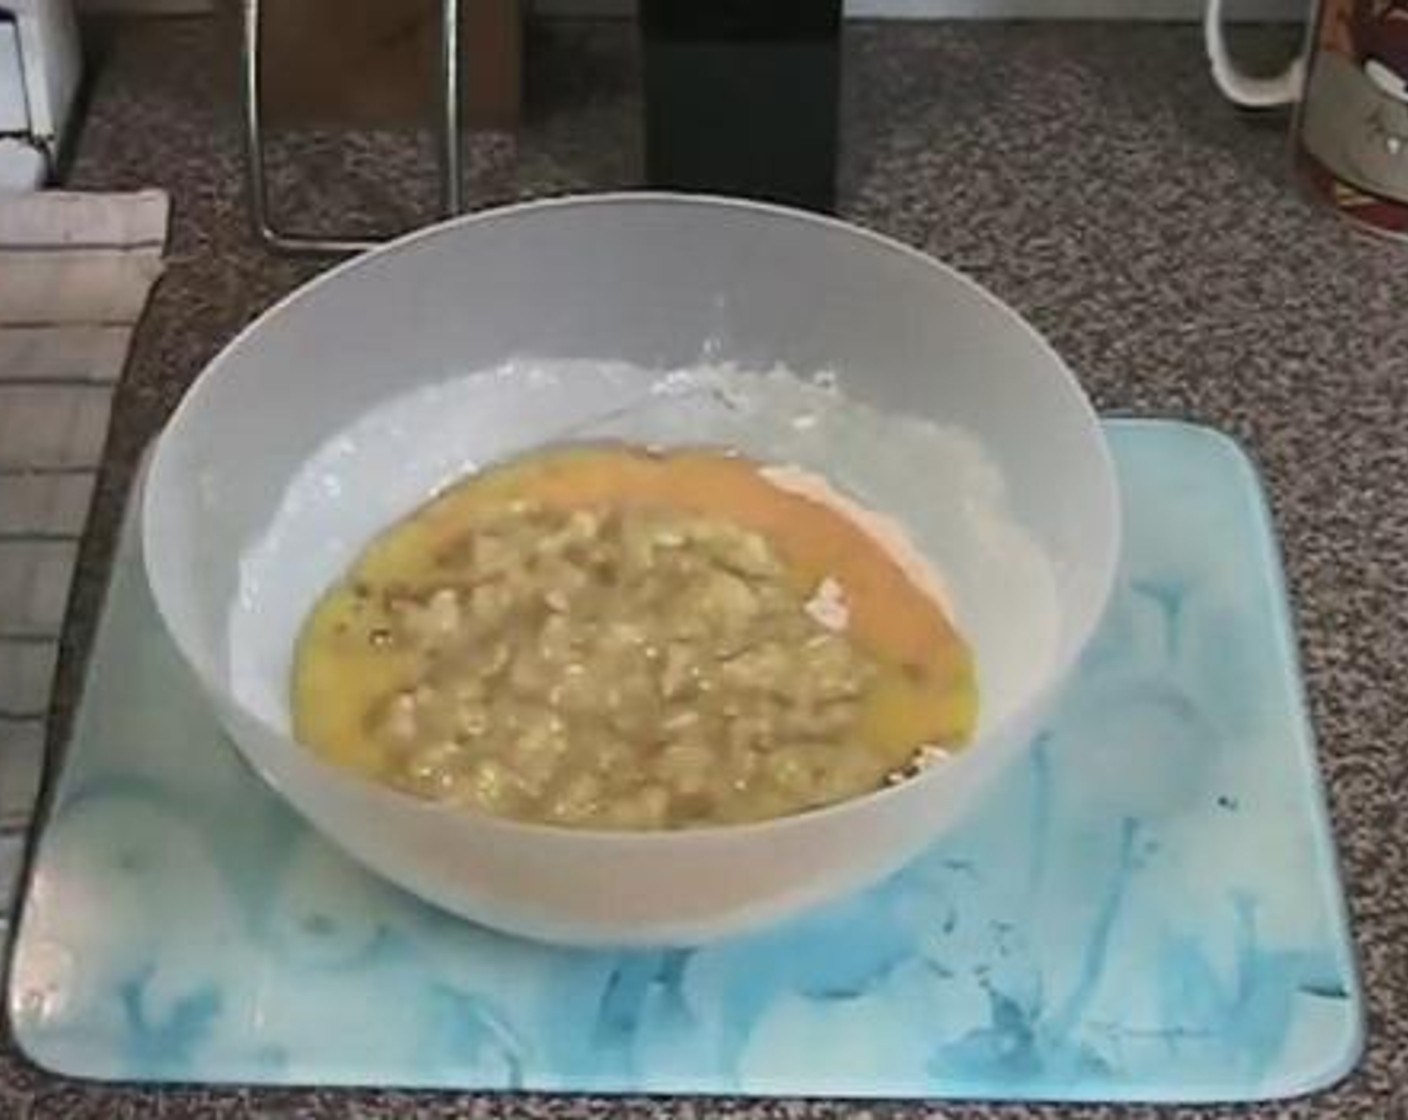 step 2 Add in the melted Butter (1/2 cup), beaten Eggs (2), and diced Bananas (3). Combine everything well.